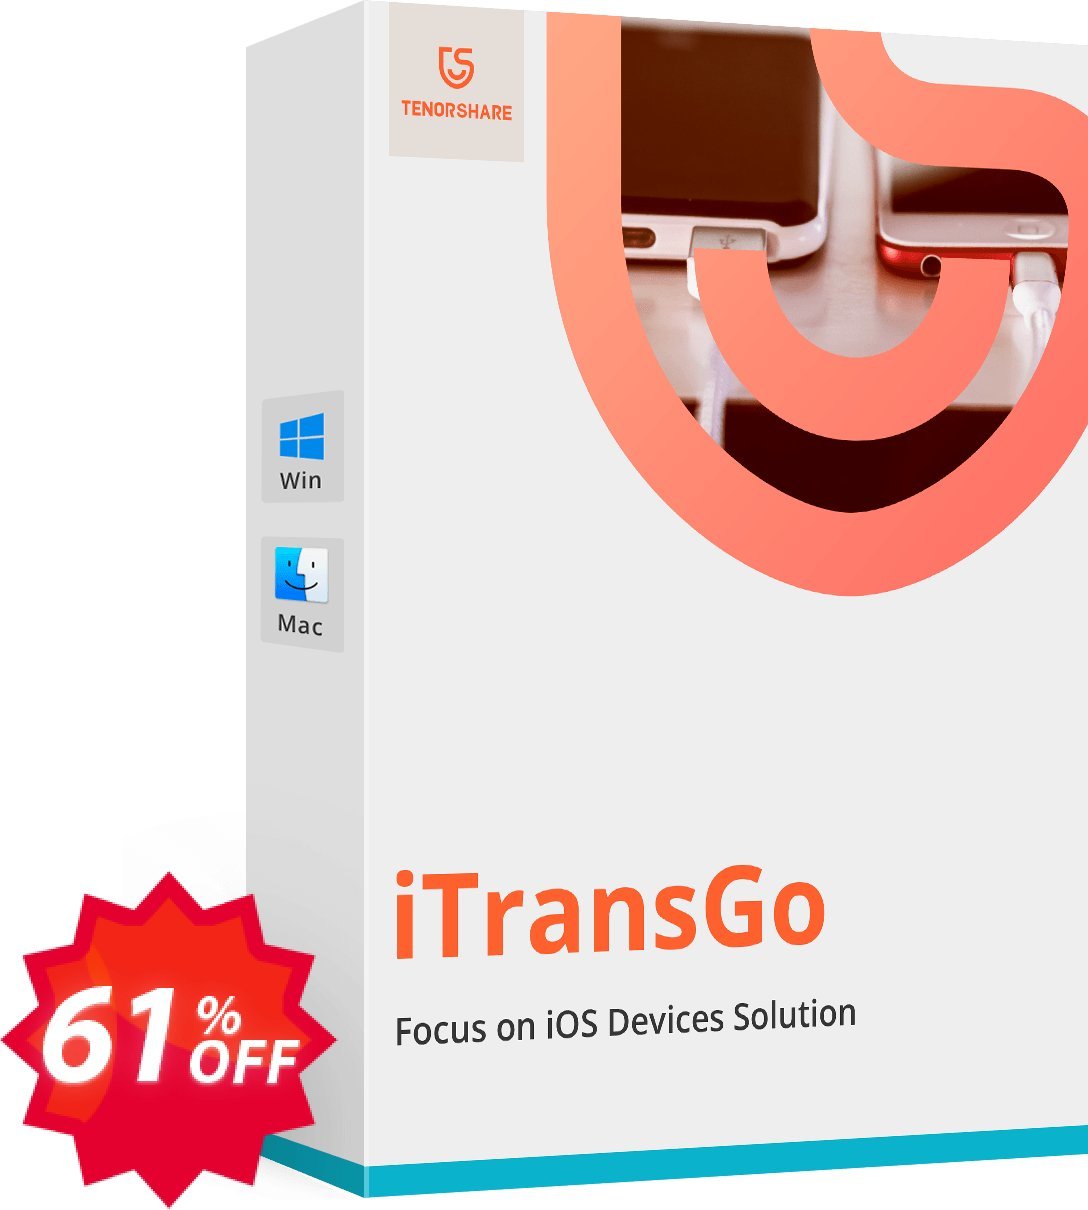 Tenorshare iTransGo, Monthly Plan  Coupon code 61% discount 